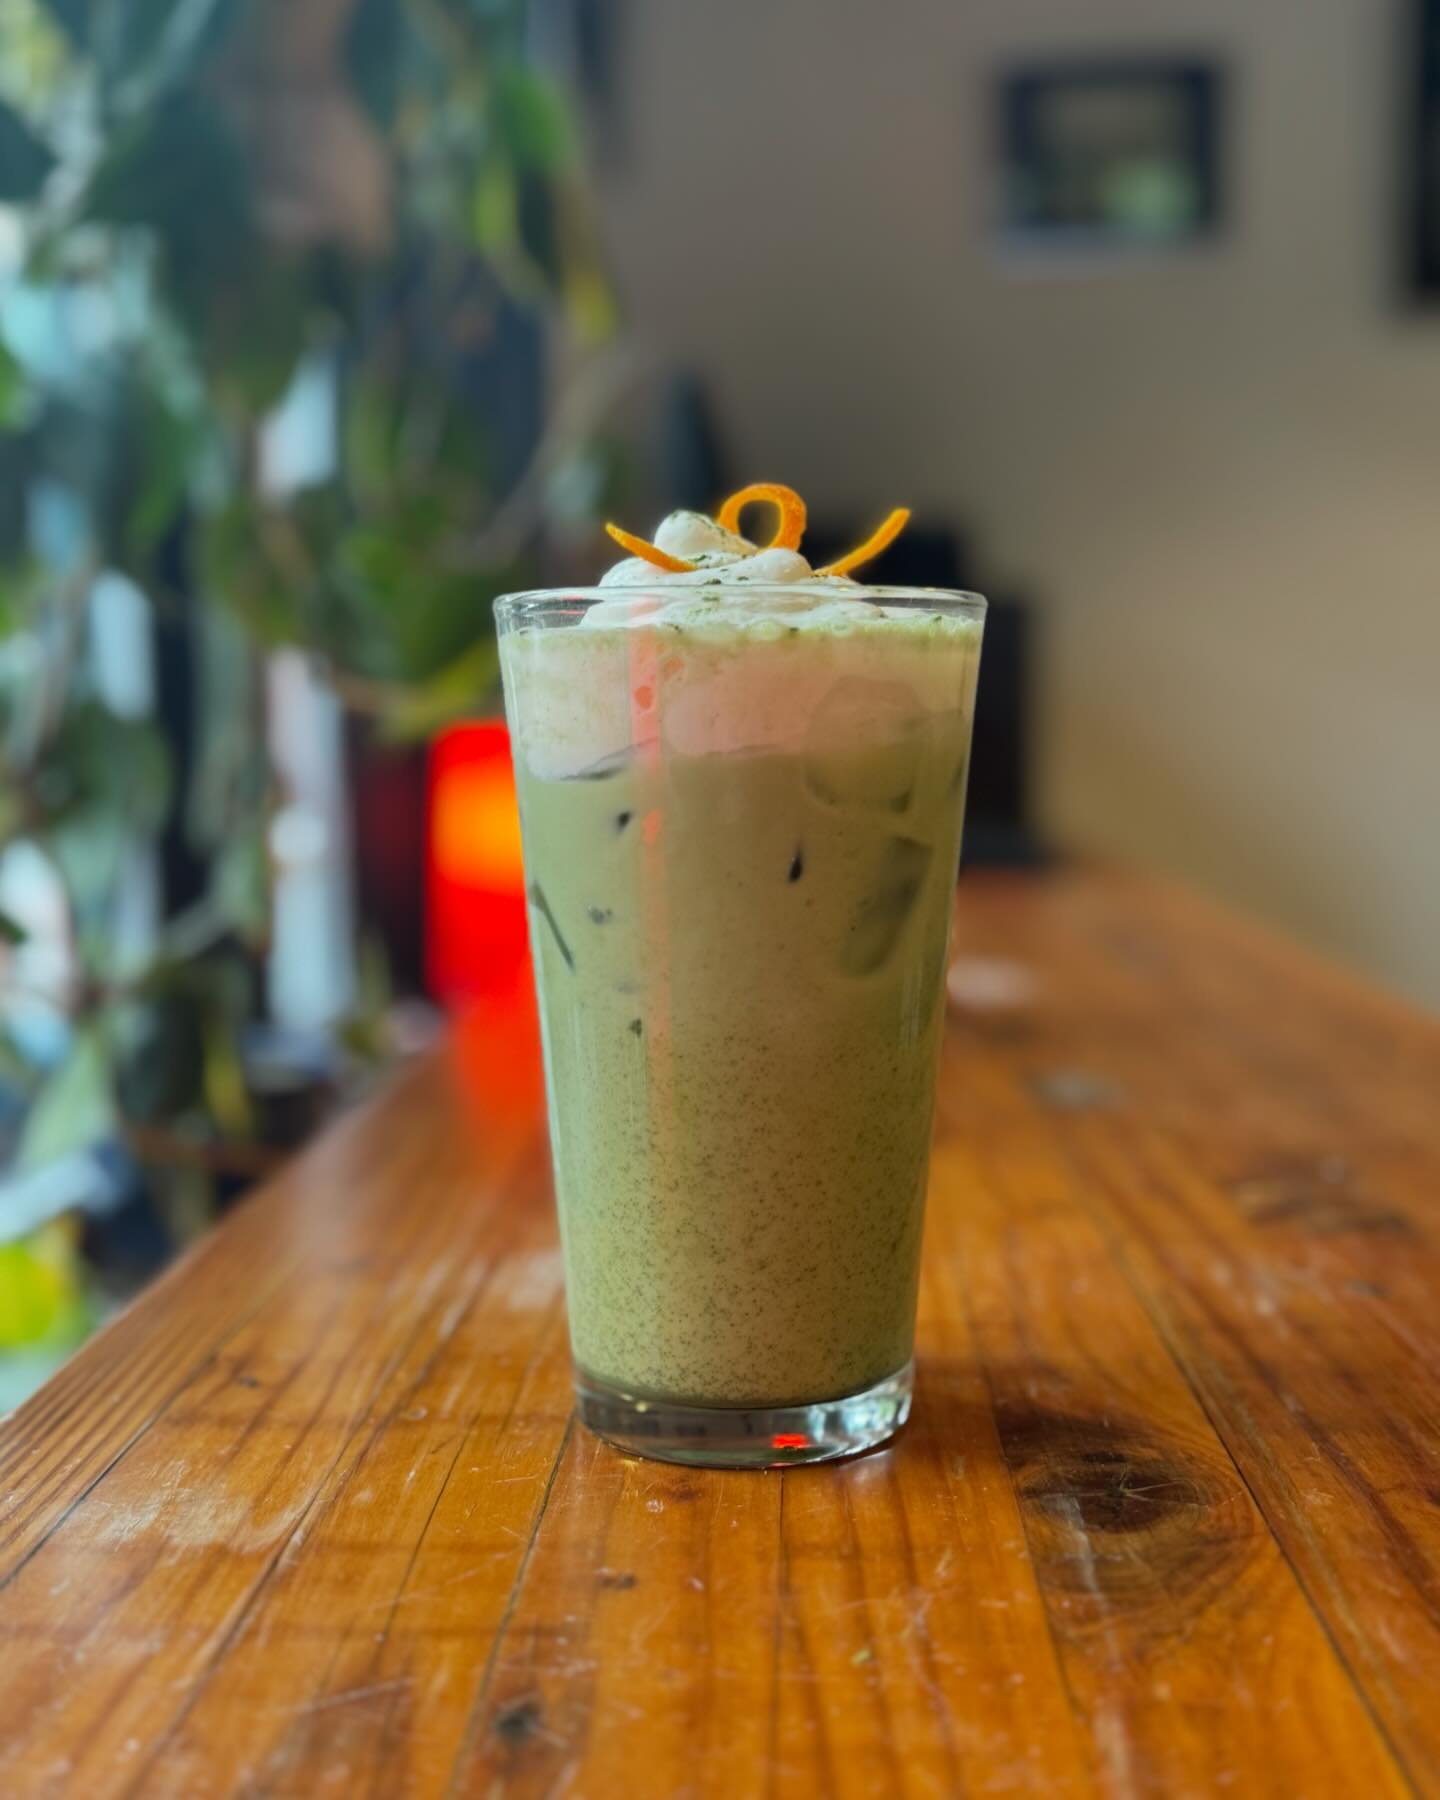 Summer Sun Specials Spotlight: Mad Matcha 100% organic matcha with orange peel and French madeleine syrup. Add some matcha to your Monday morning. ☀️➕☕️

#hotwire #seattlecoffee #specialsofthemonth #hotwirecoffee #westseattle #coffeeholic #caffeine #